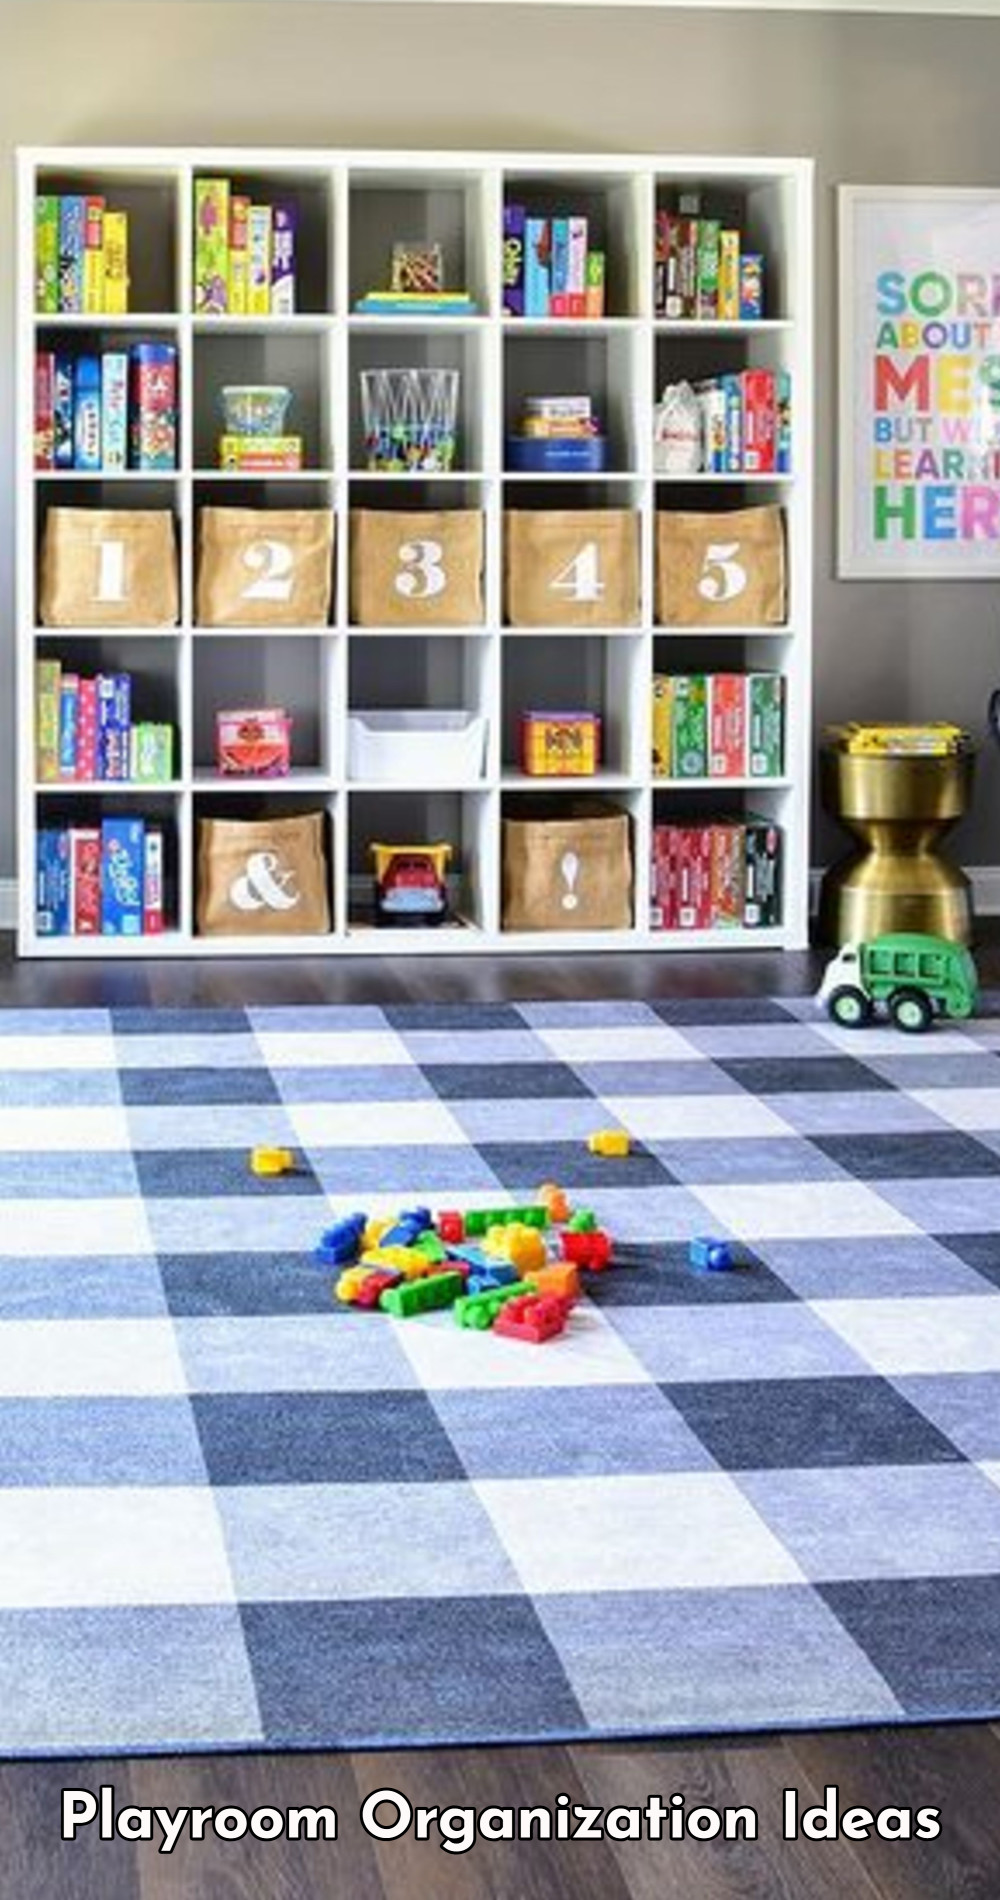 organized toys in playroom - fun room decor shelves cubbies baskets for toys and books